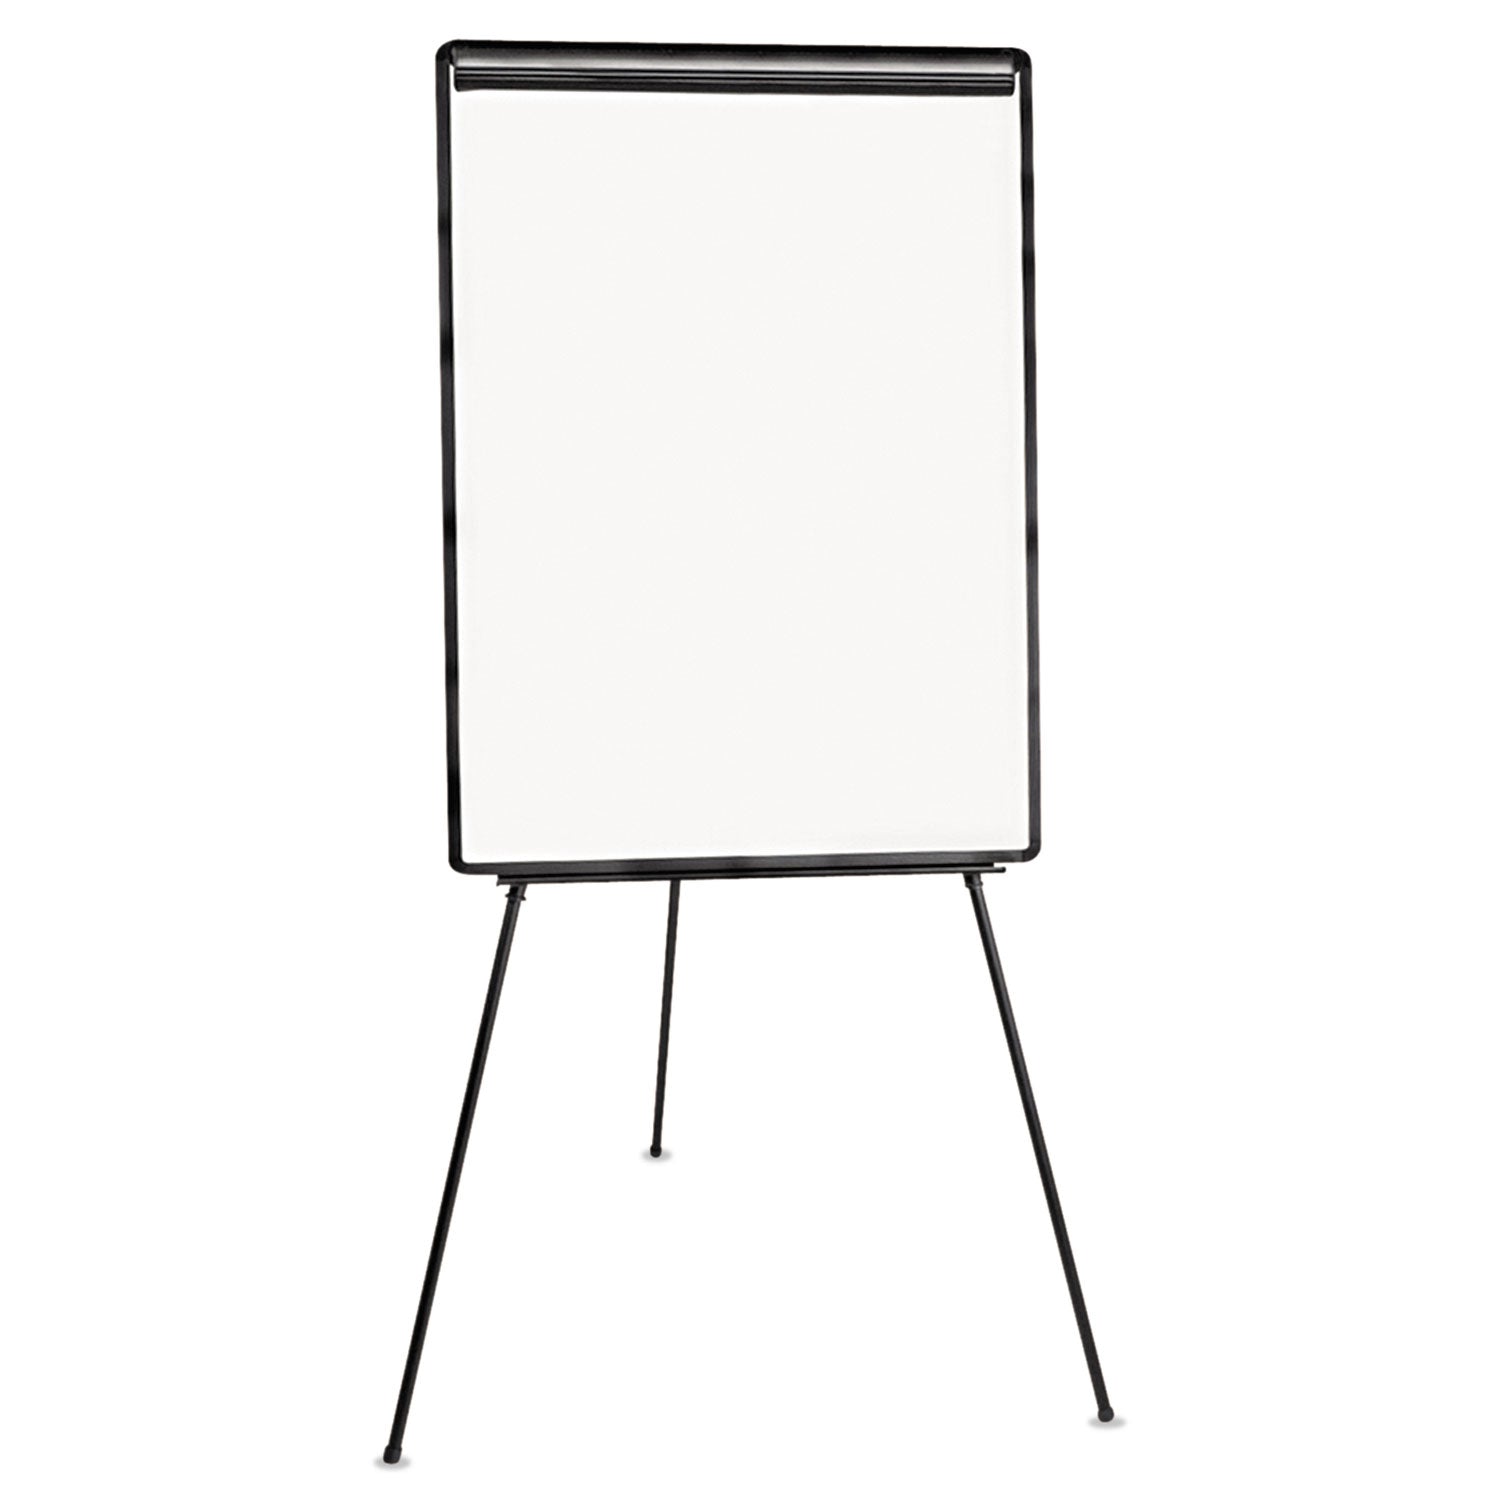 Dry Erase Board with Tripod Easel, 29 x 41, White Surface, Black Frame - 